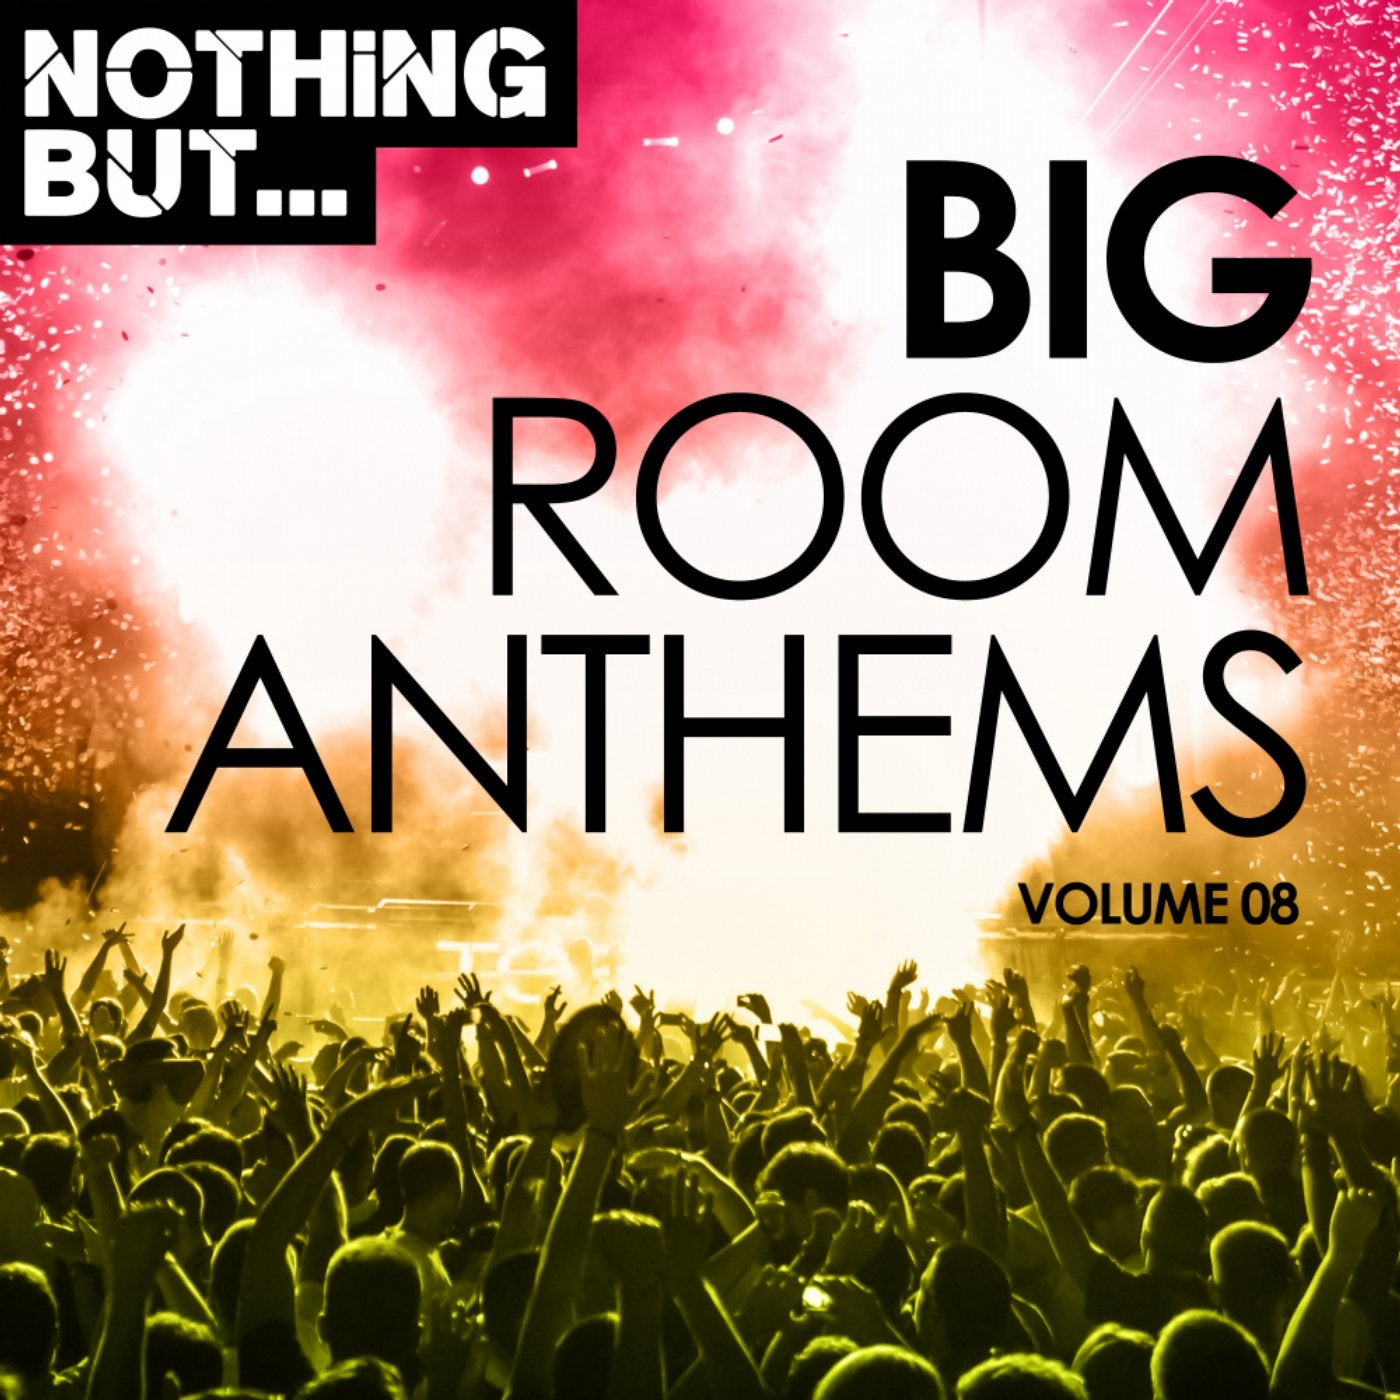 Nothing But... Big Room Anthems, Vol. 08